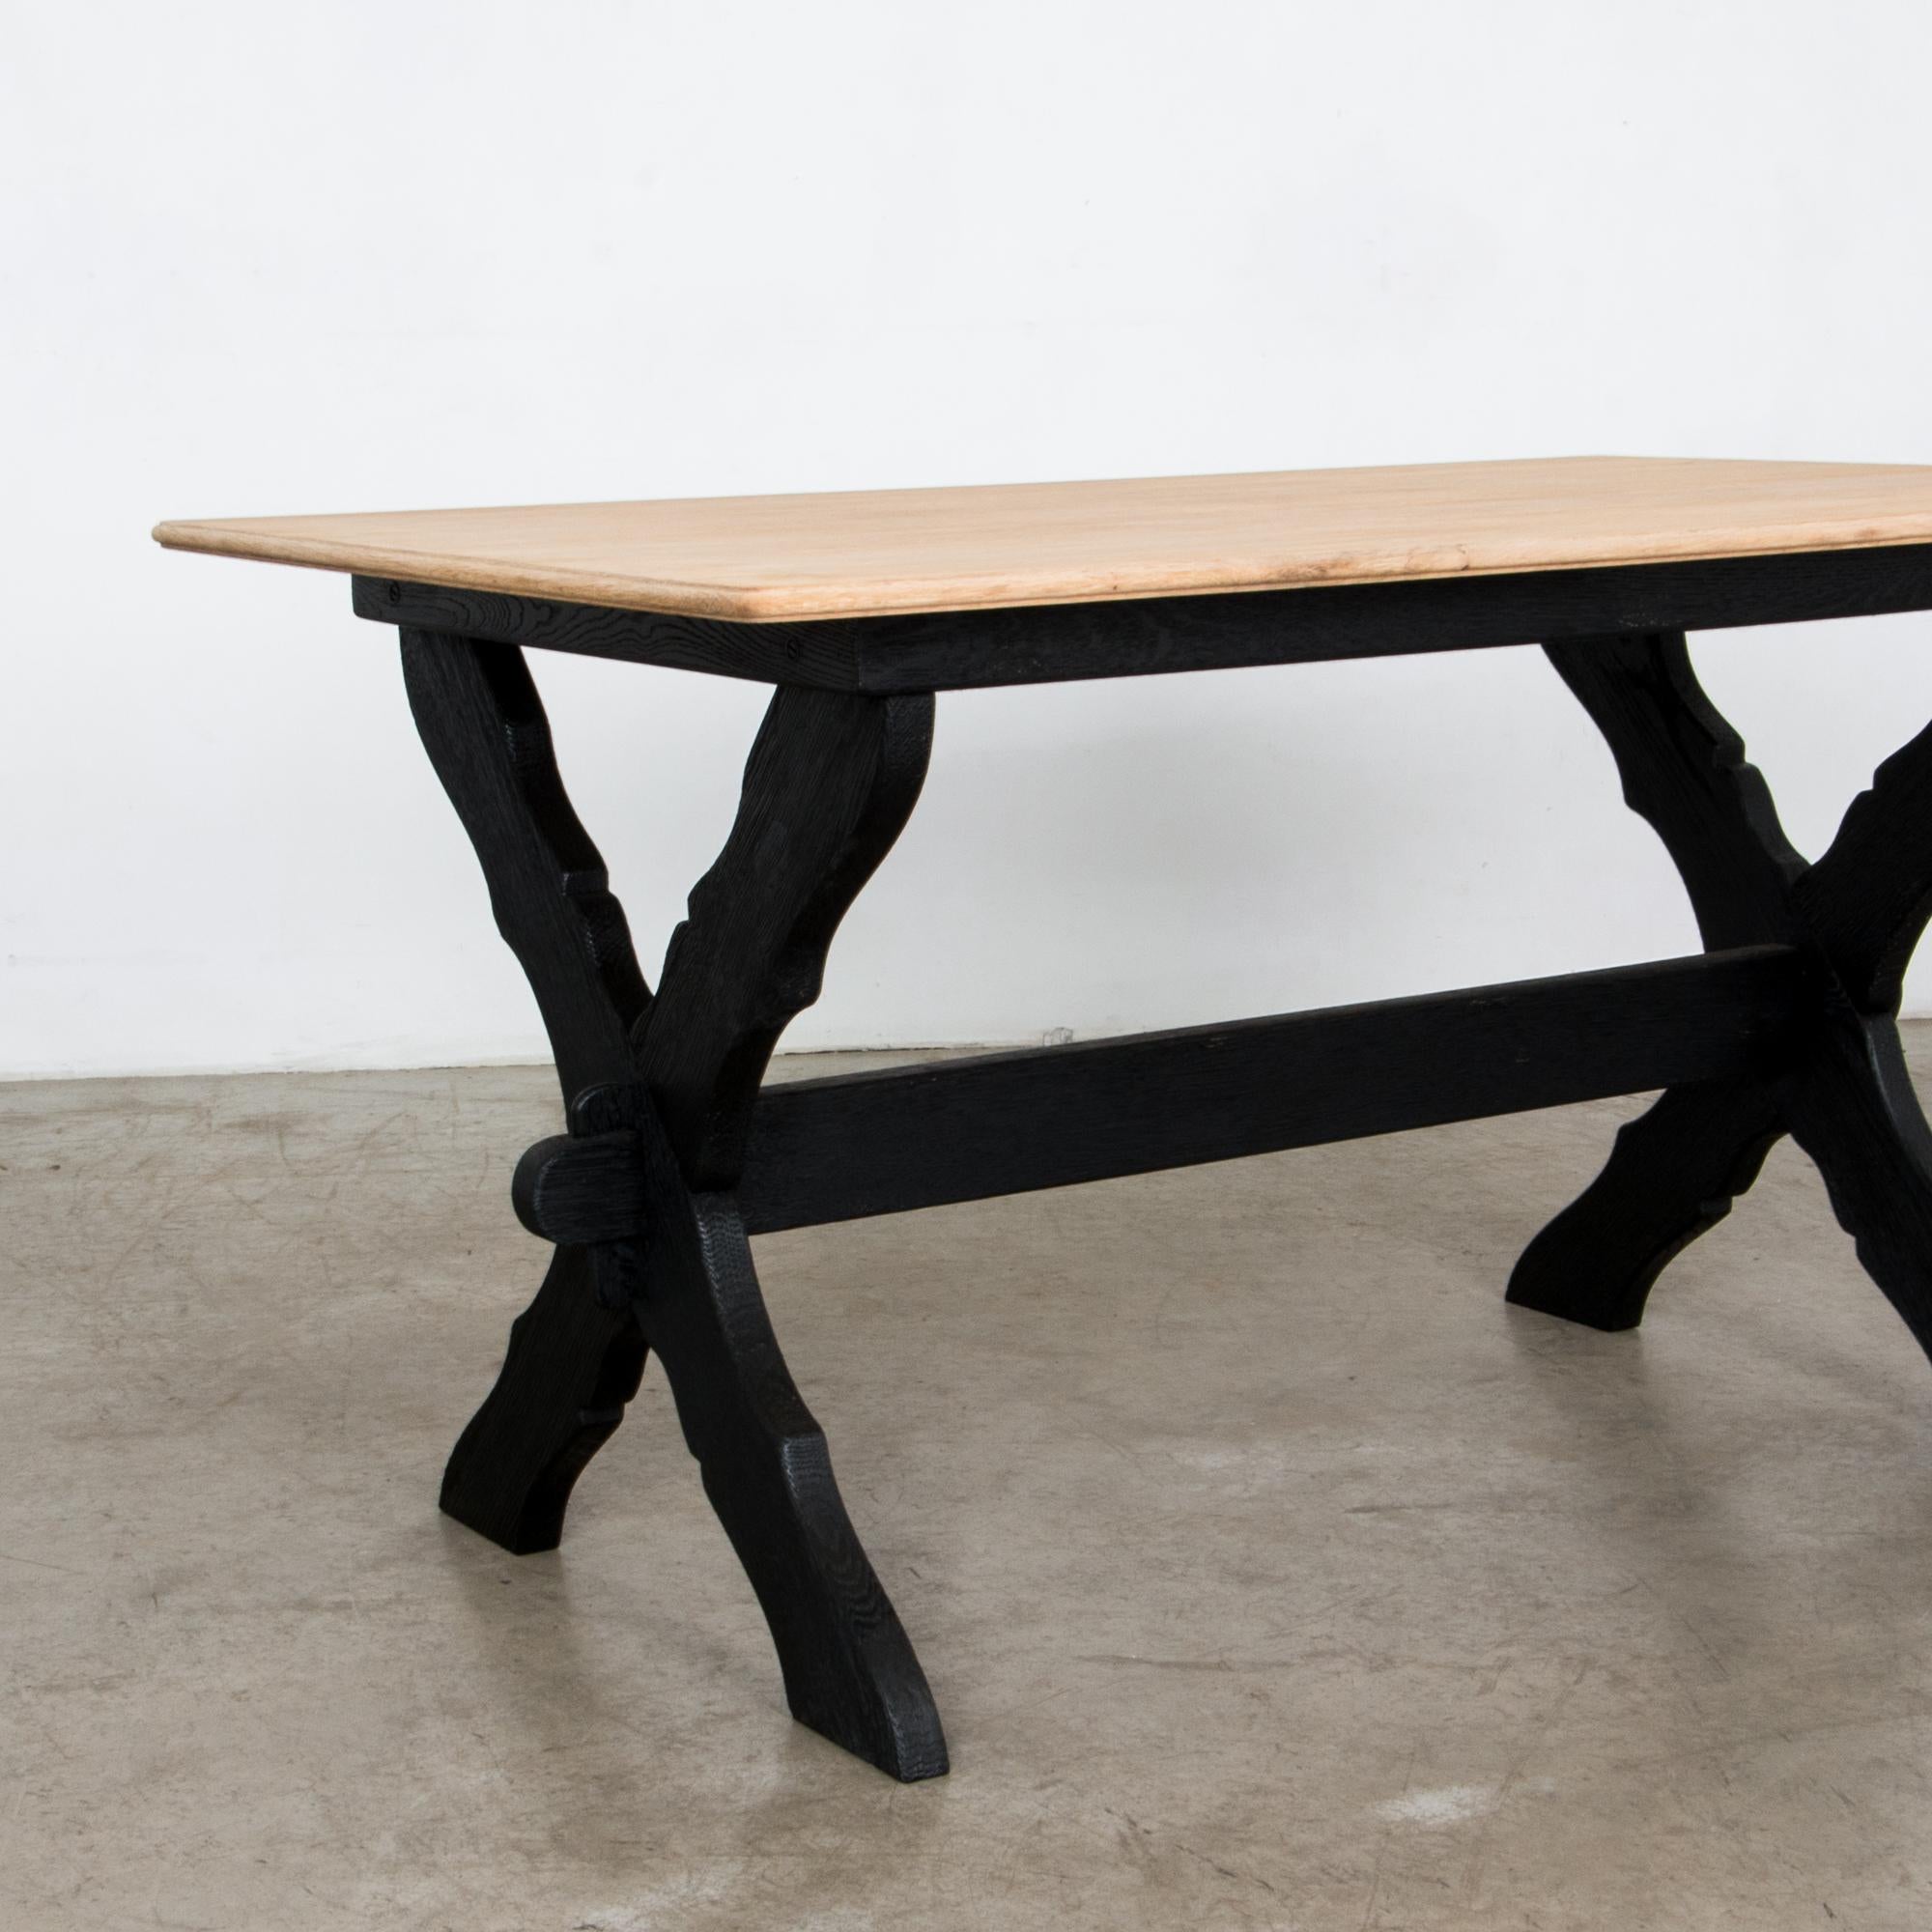 Wood 1960s Belgian Bleached Oak Table with Black Patinated Base